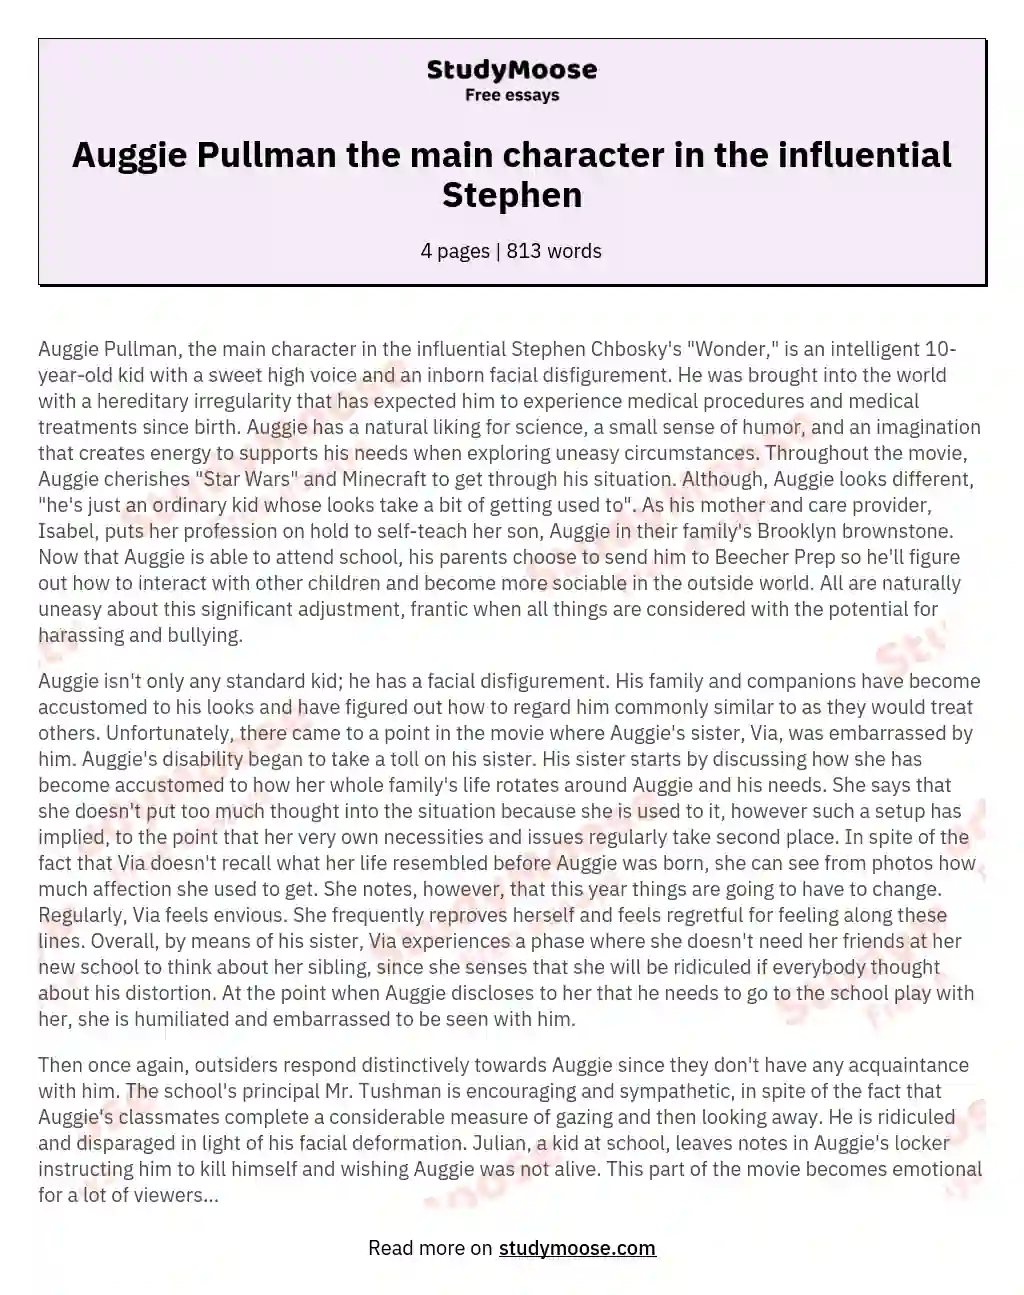 Auggie Pullman the main character in the influential Stephen essay